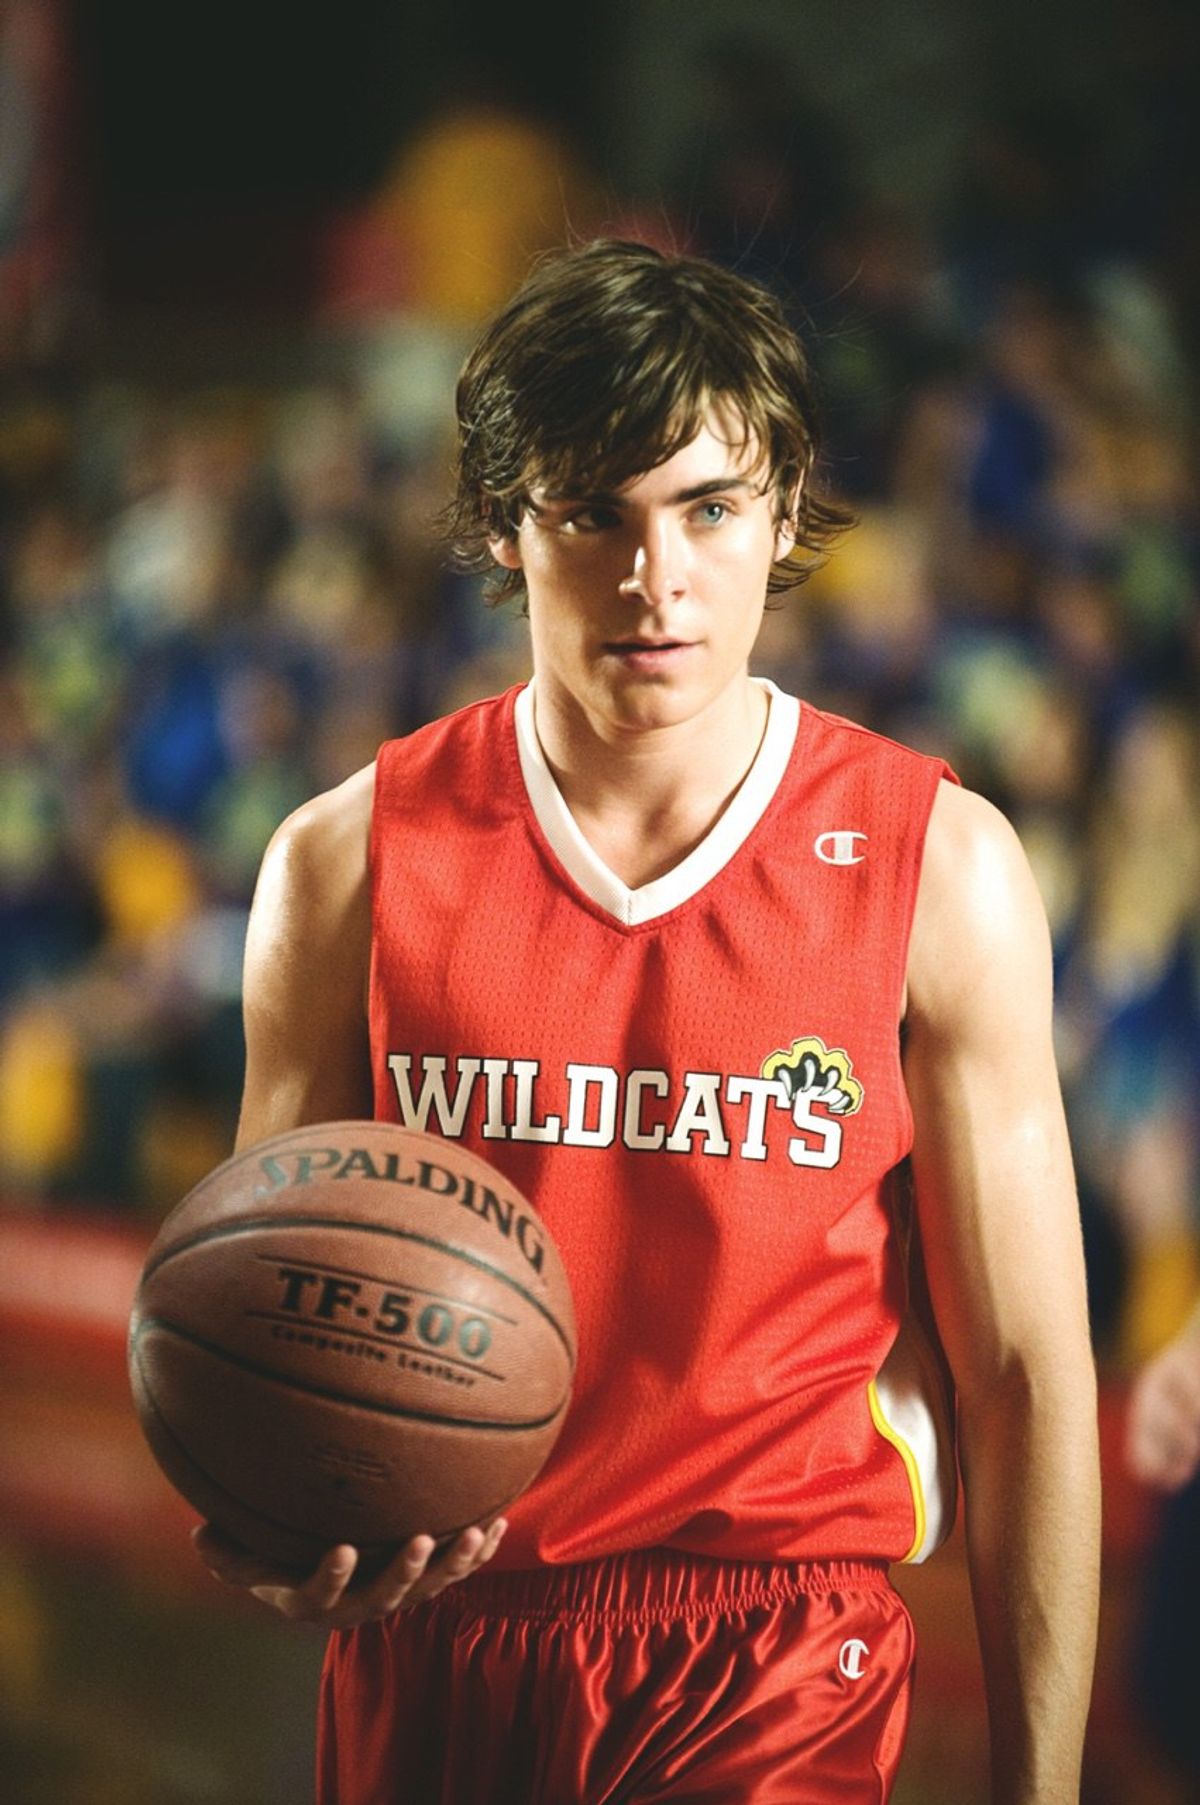 10 Lies HSM Made Me Think High School Was Actually Like